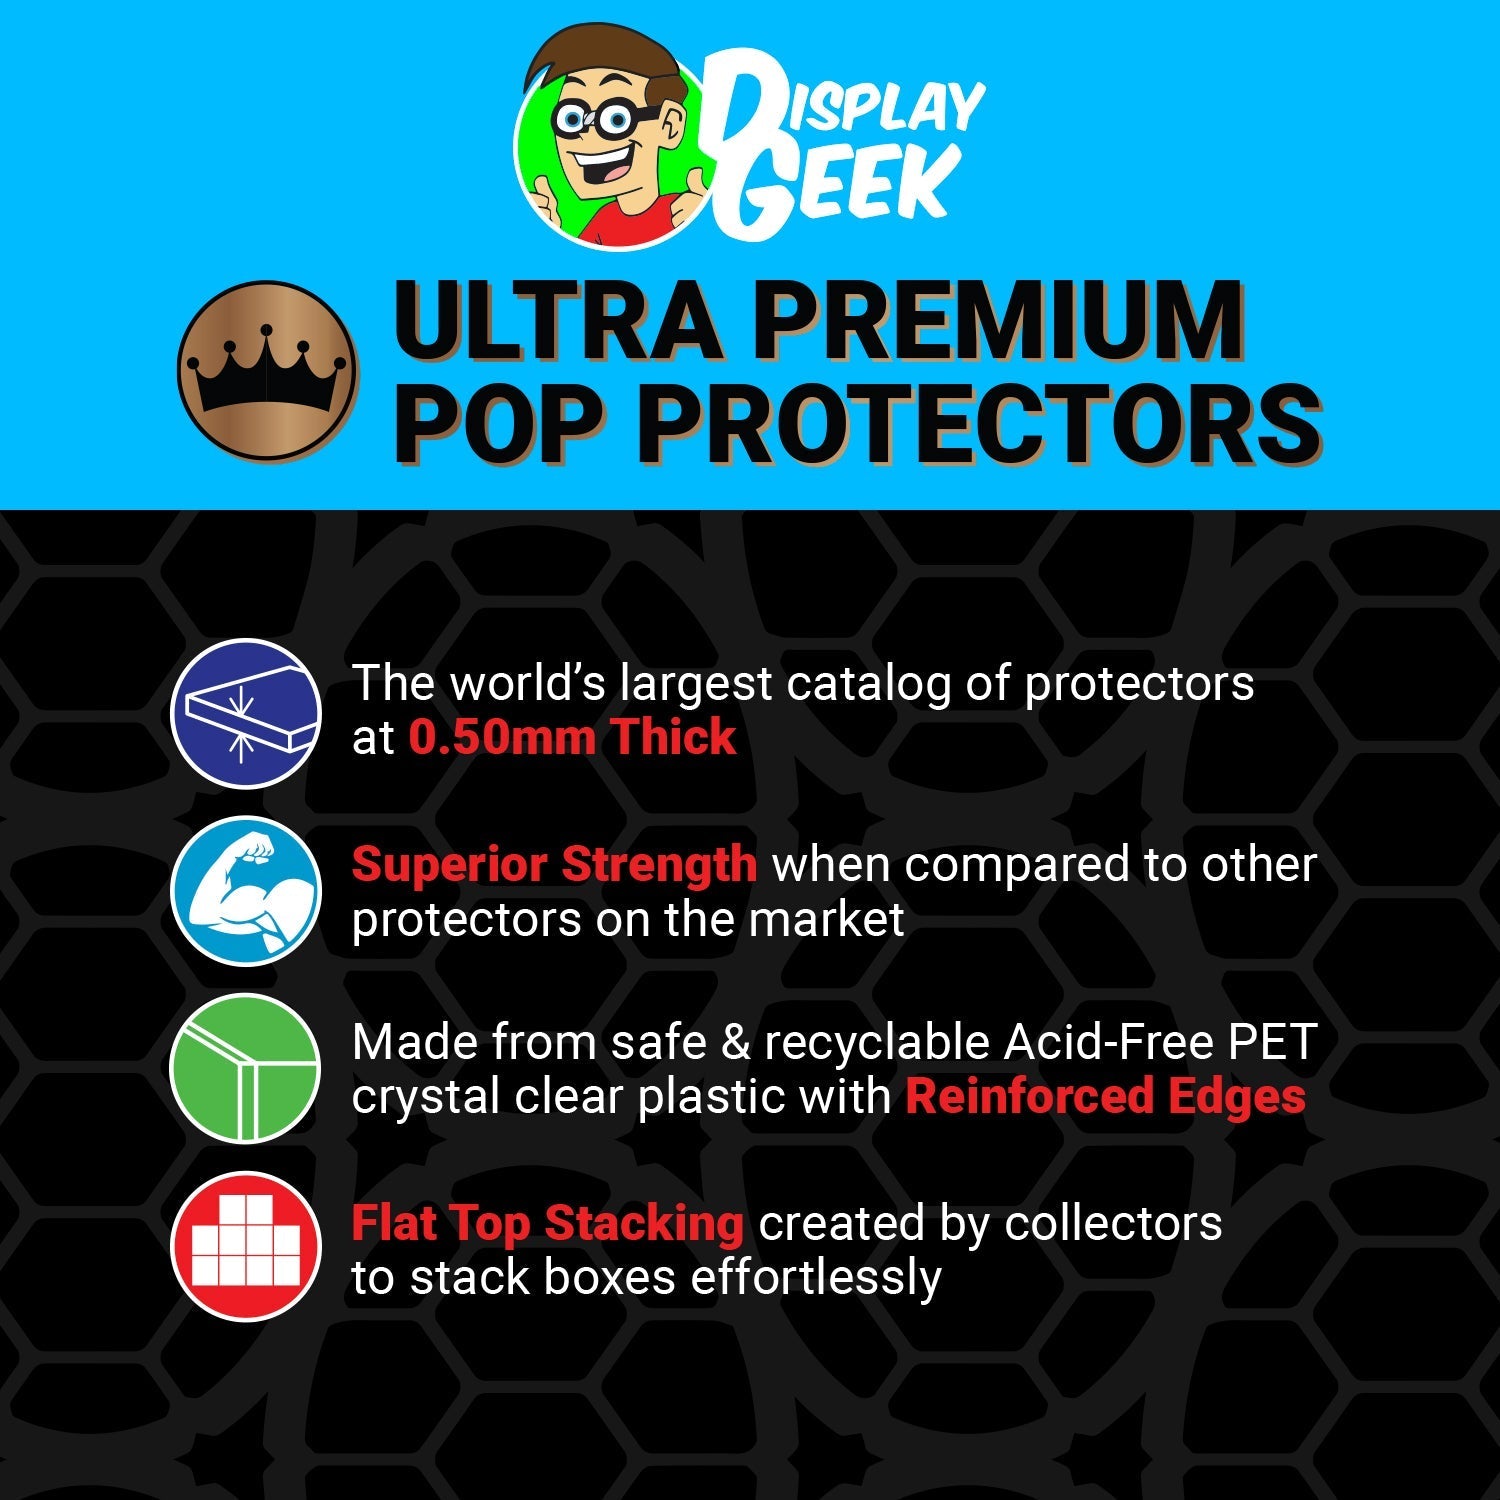 Pop Protector for Lock, Shock & Barrel in Tub #474 Funko Pop Movie Moments - PPG Pop Protector Guide Search Created by Display Geek